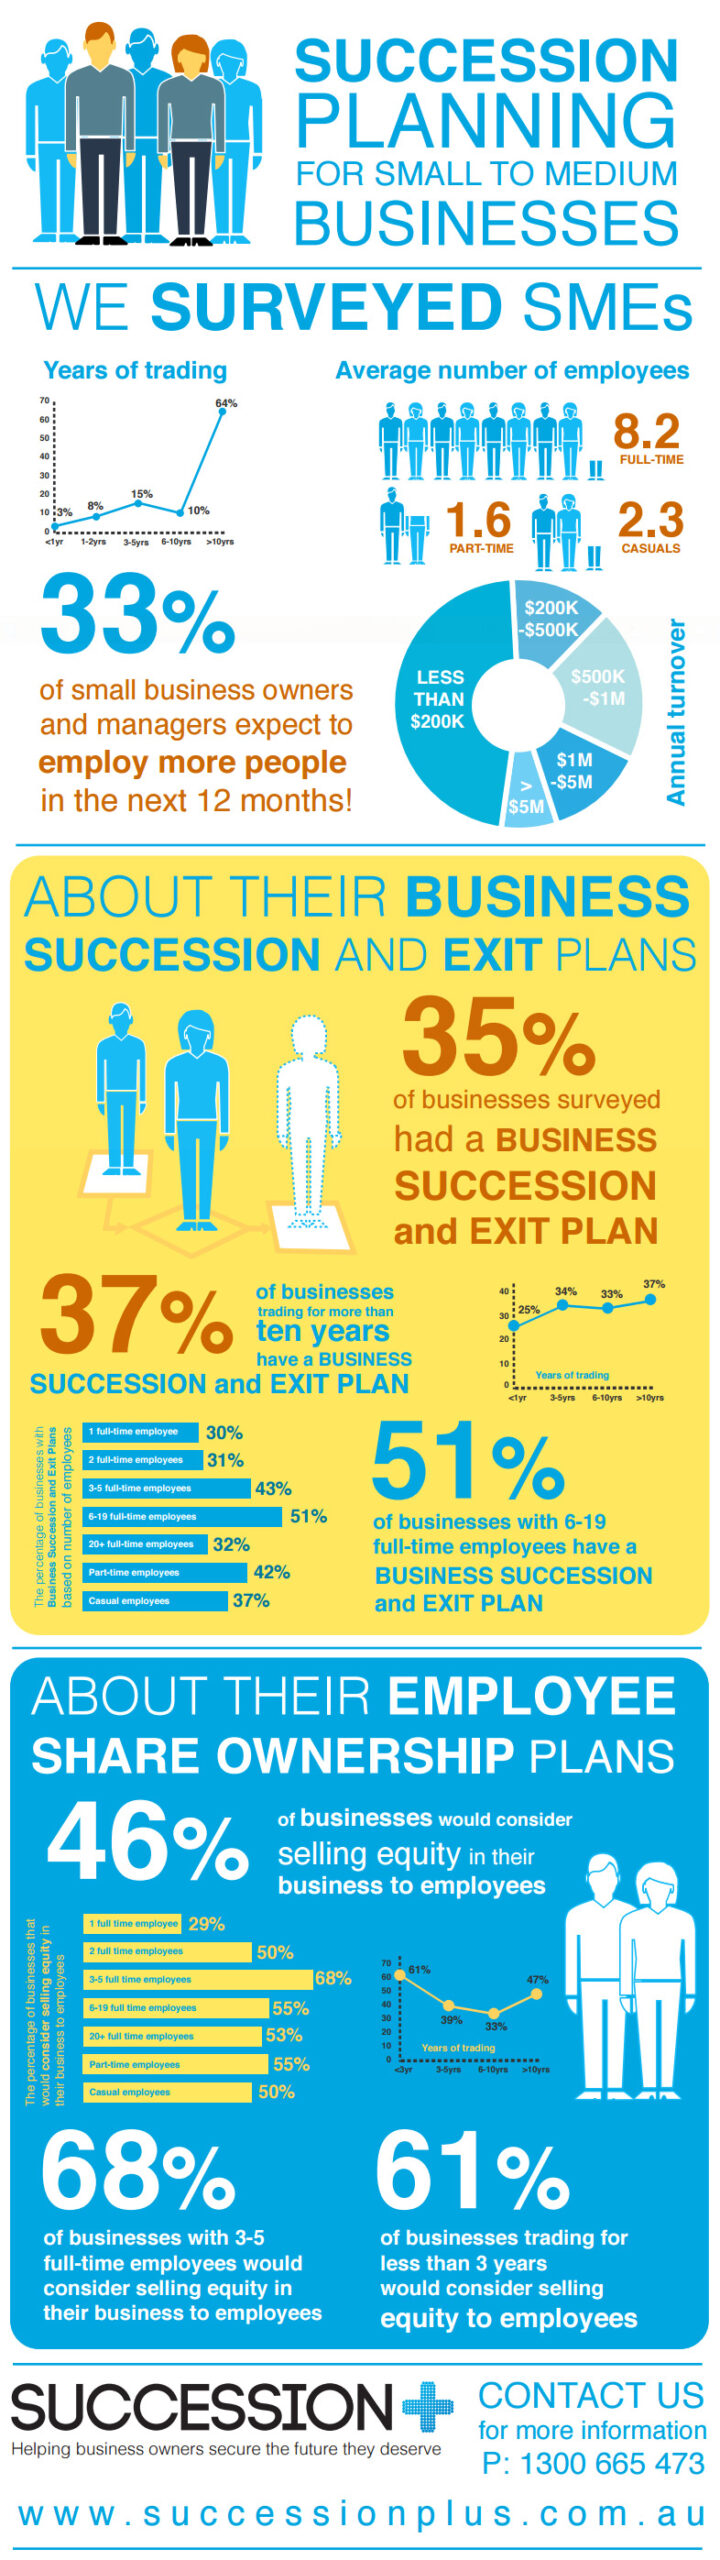 The Future is Brighter with Succession Planning | Management infographic, Succession planning ...